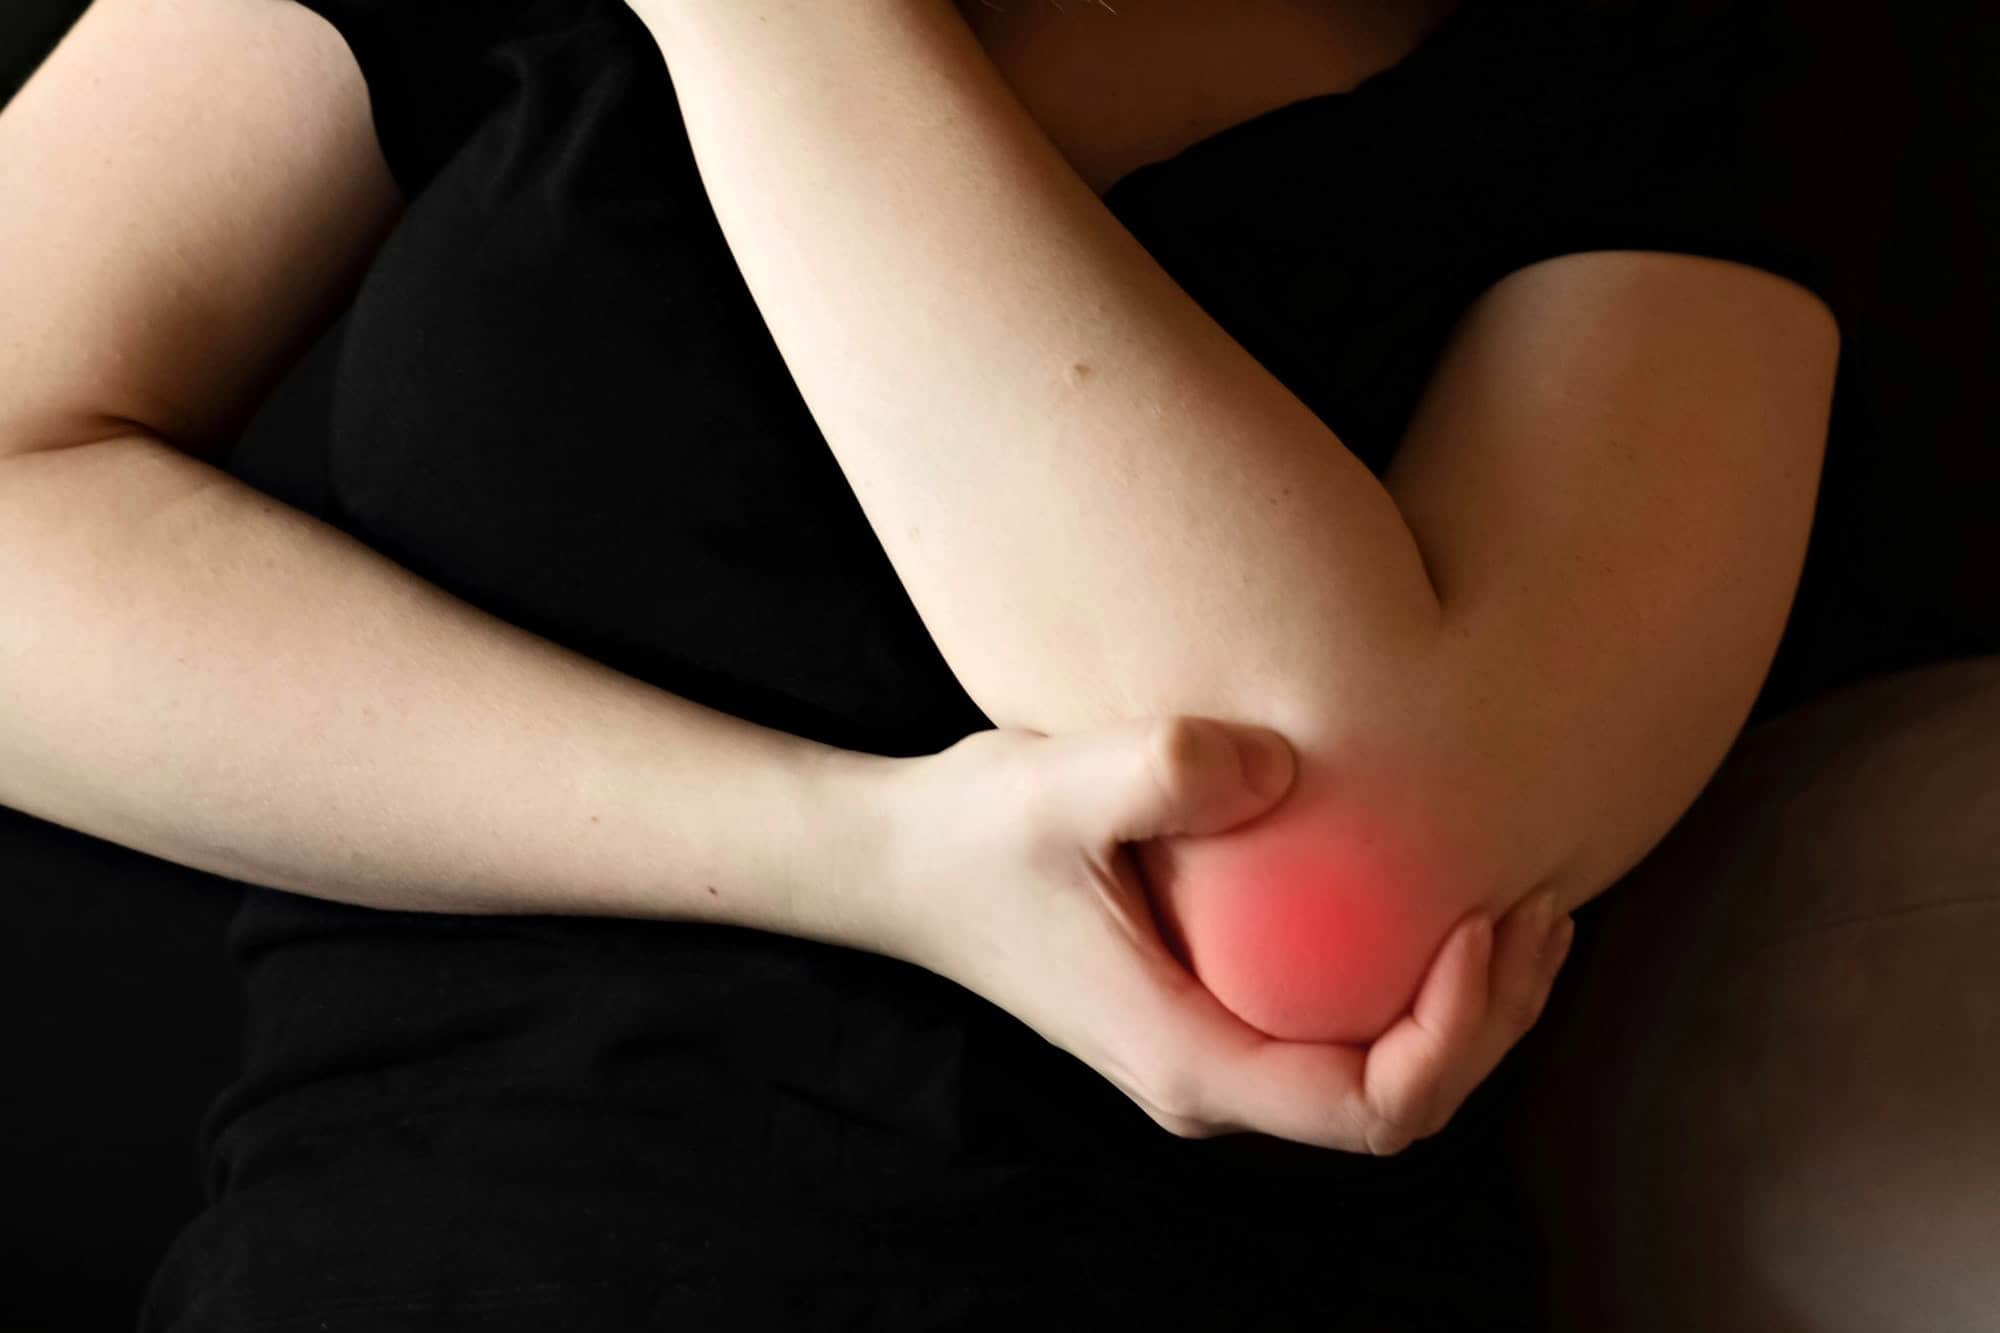 The problem of pain in the elbow joint - arthritis and arthrosis in a female athlete